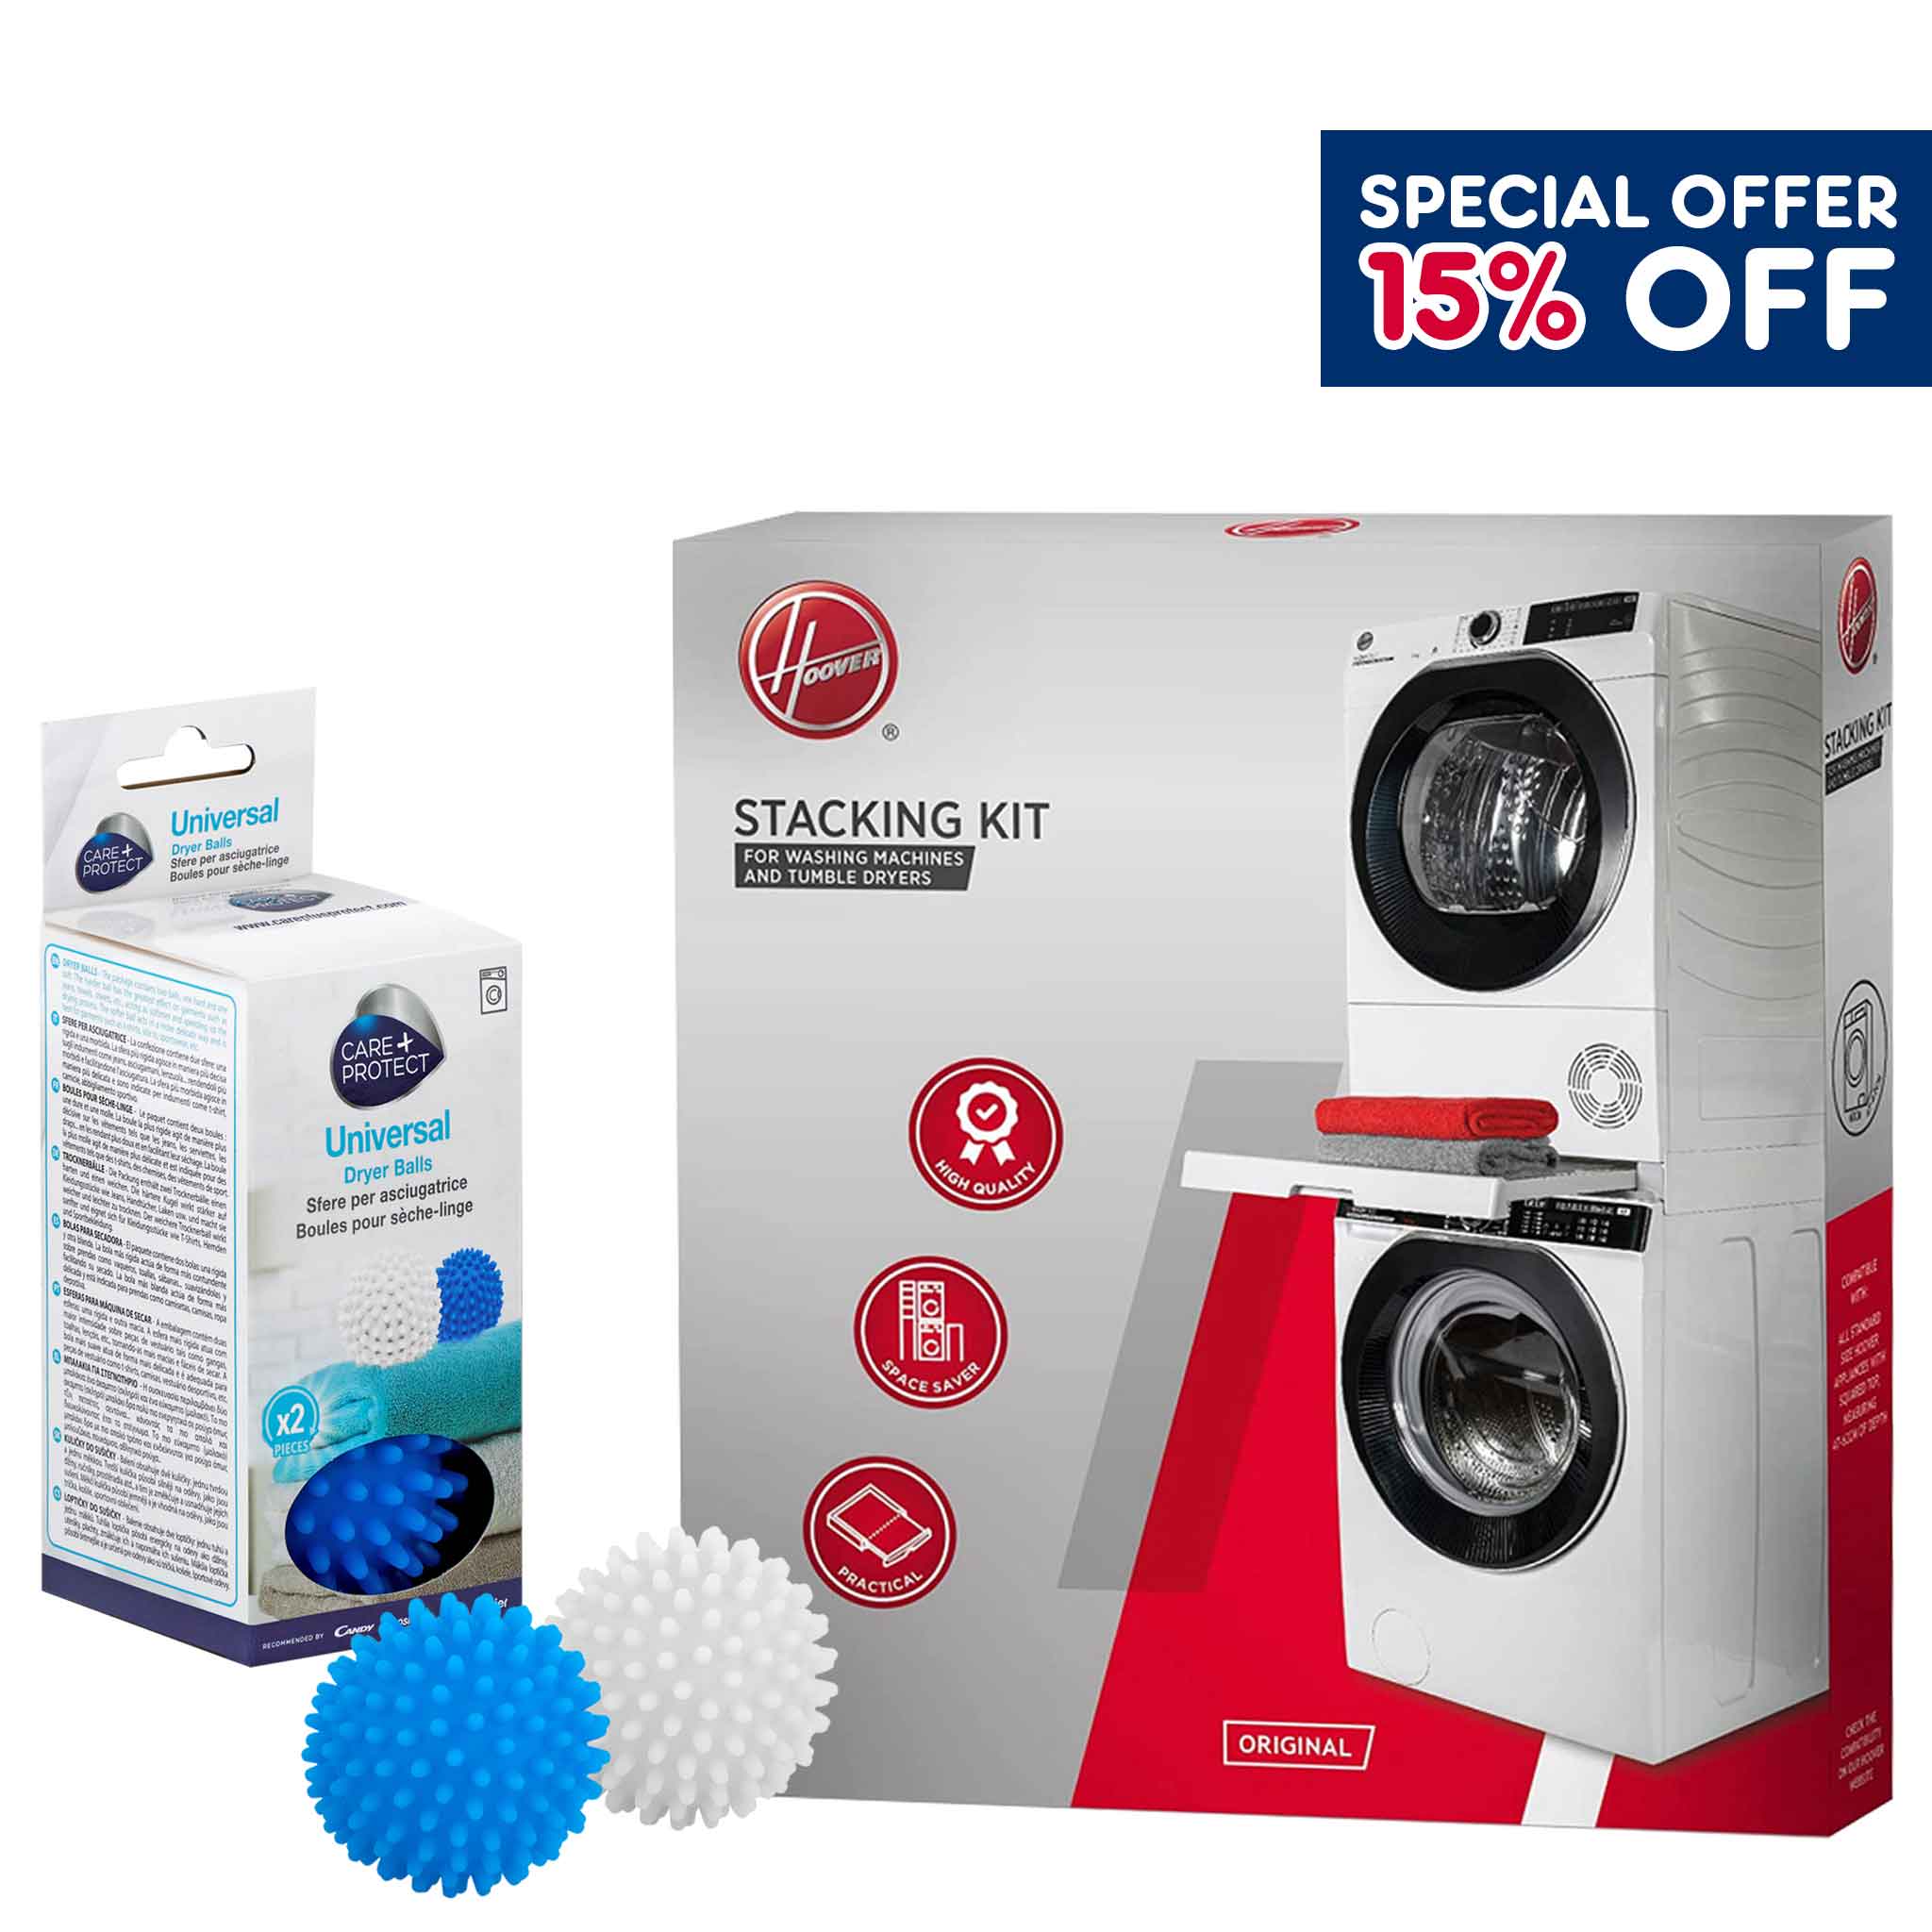 Hoover Stacking Kit with sliding shelf for all Hoover dryers and washing machines + Dryer Ball